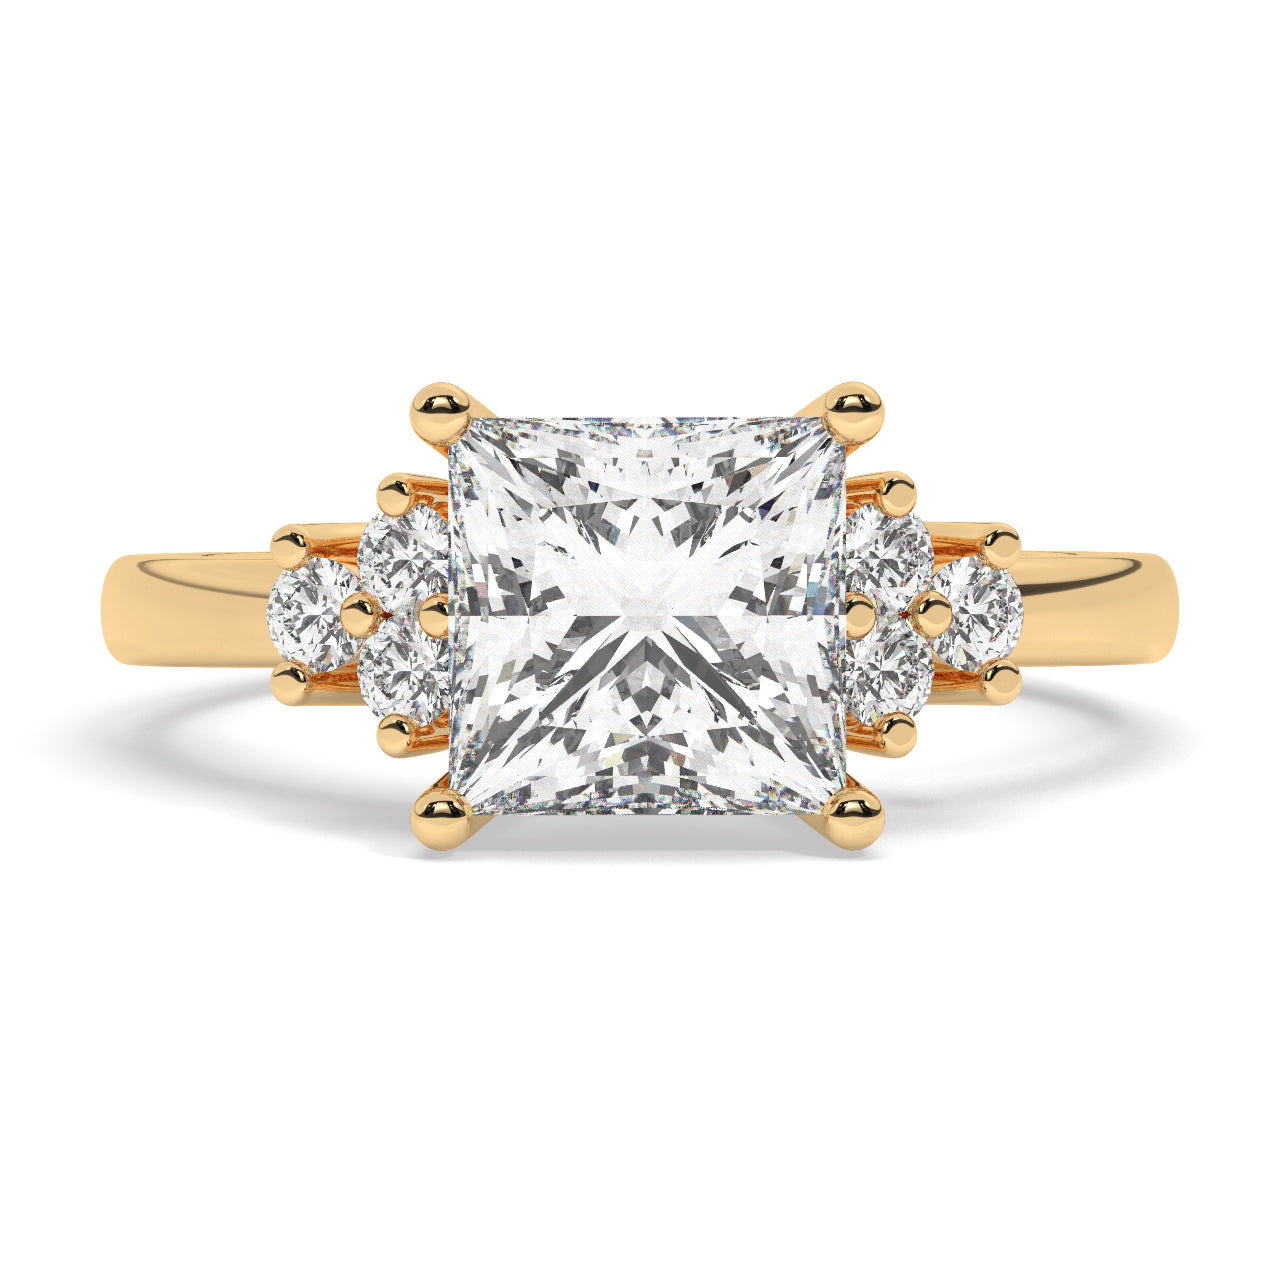 Yellow Gold Princess Cut Engagement Ring Accompanied by Round Stones